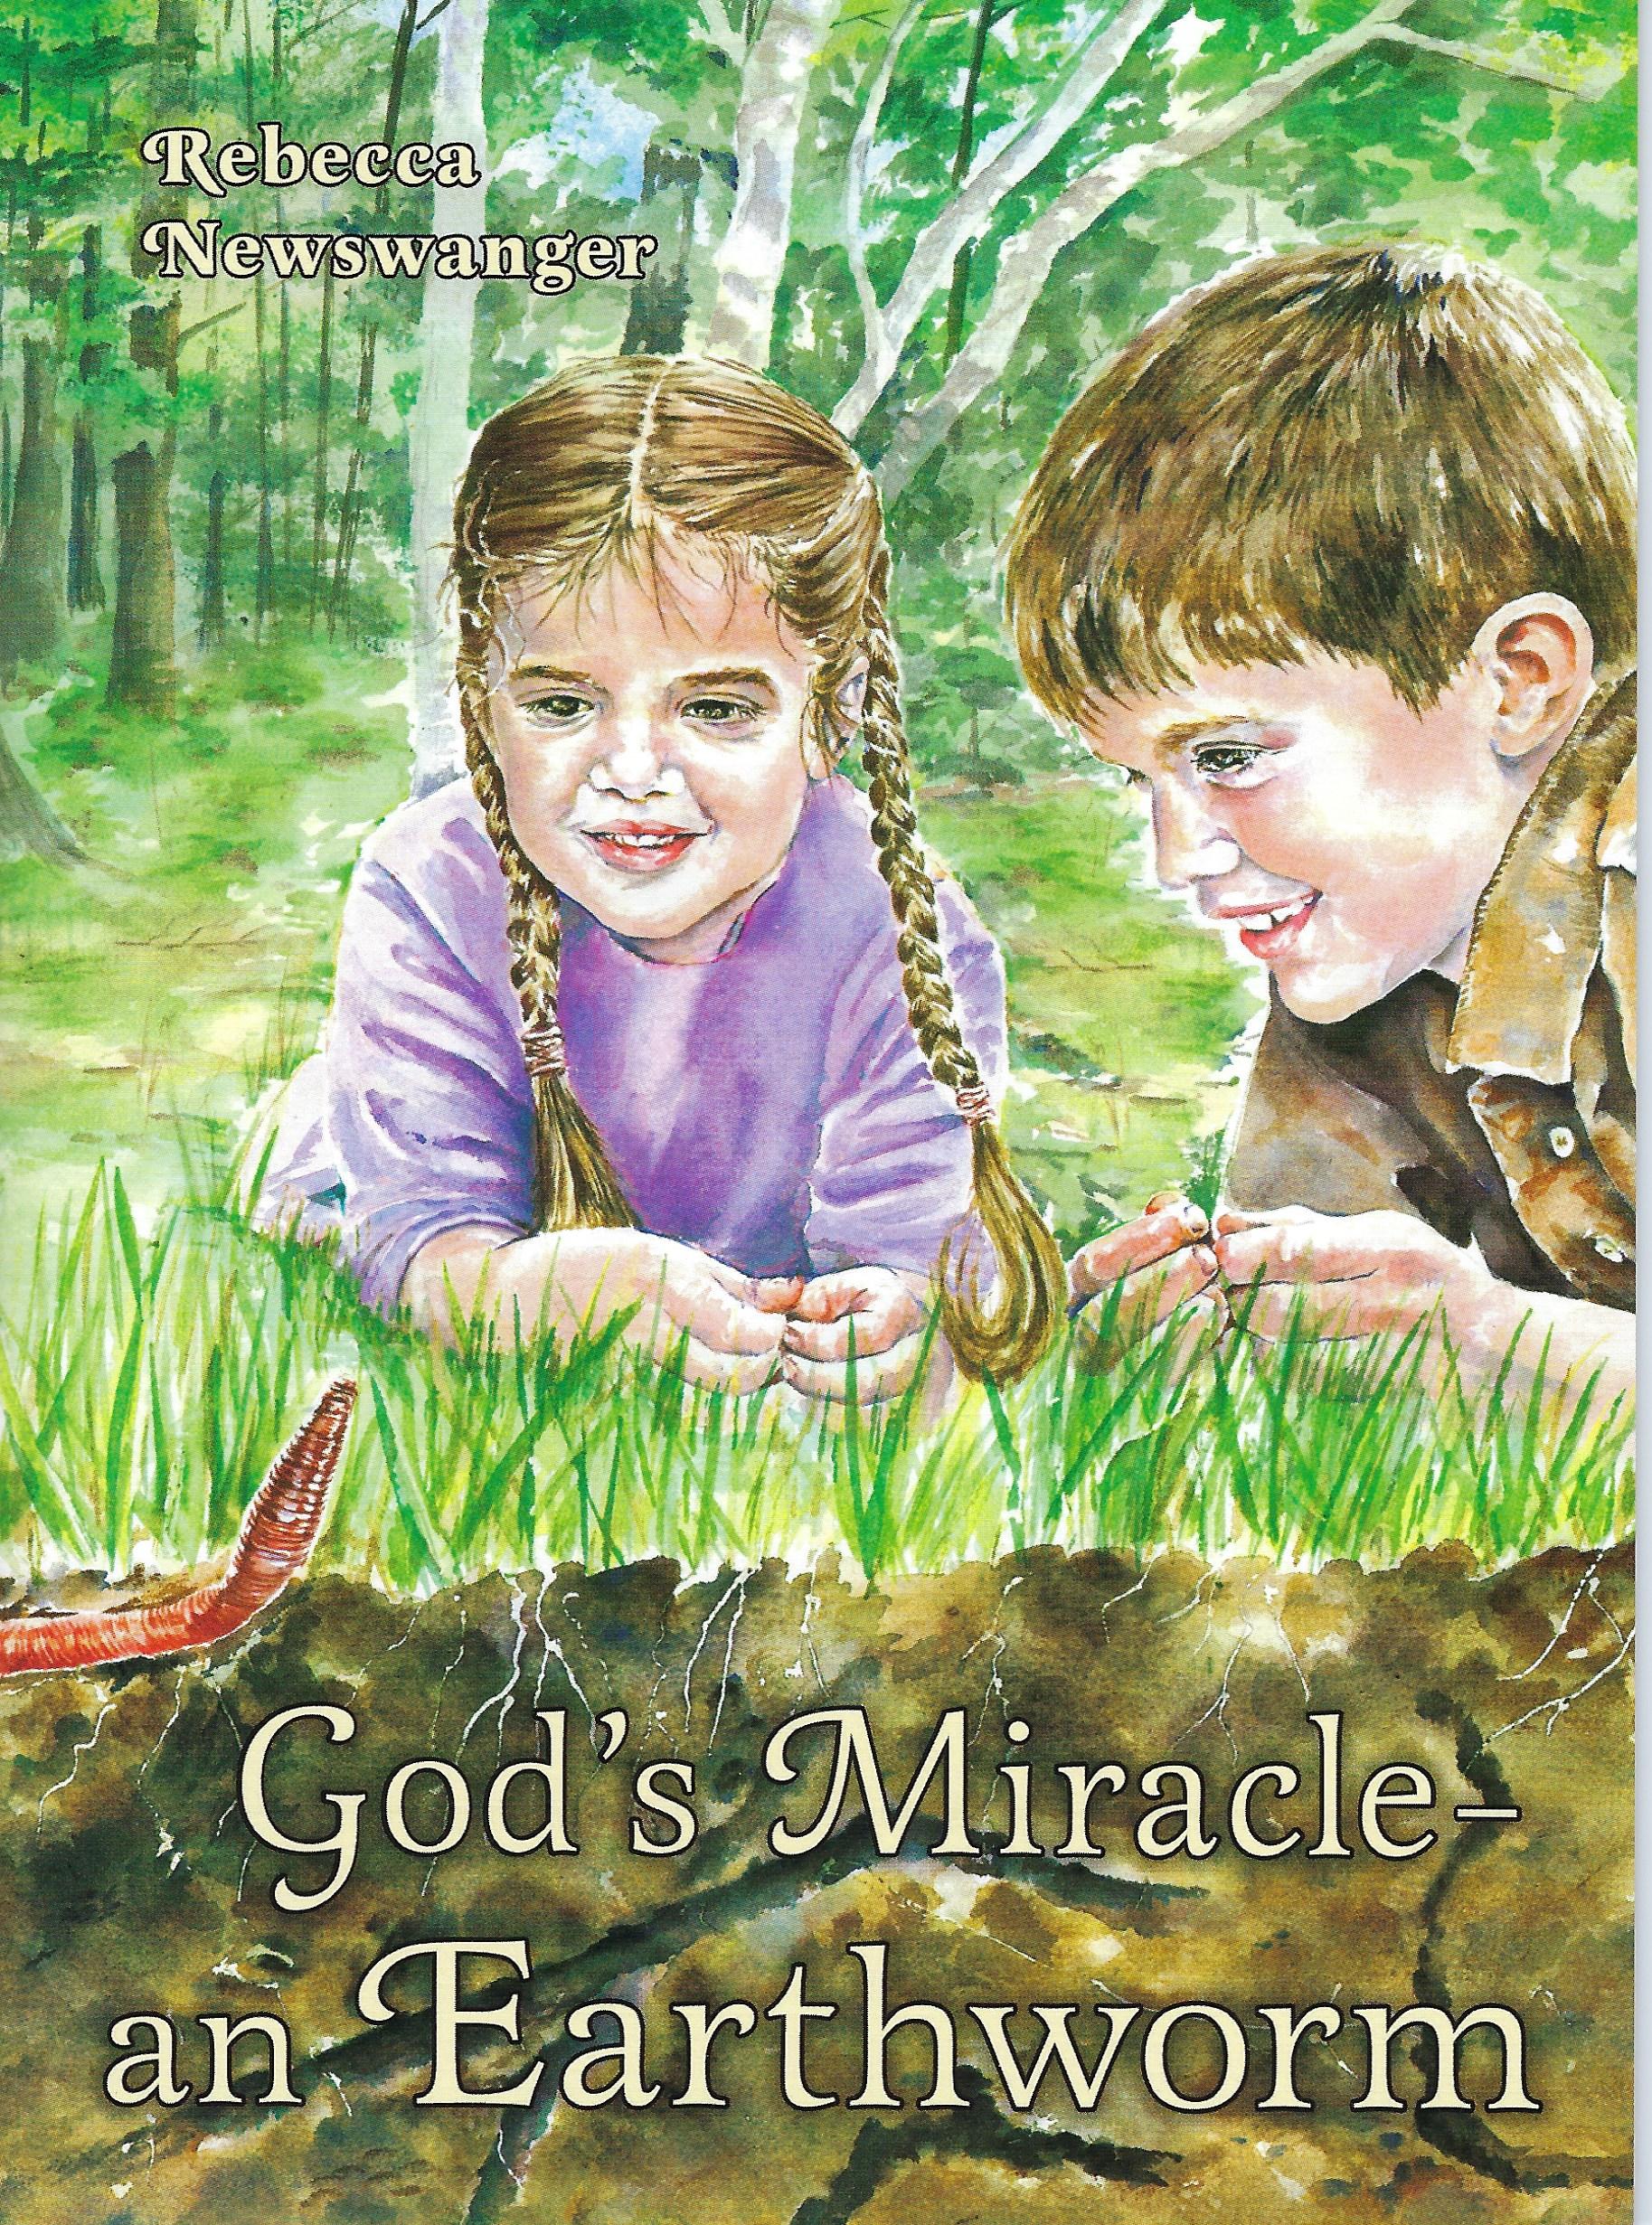 GOD'S MIRACLE - AN EARTHWORM Rebecca Newswanger - Click Image to Close